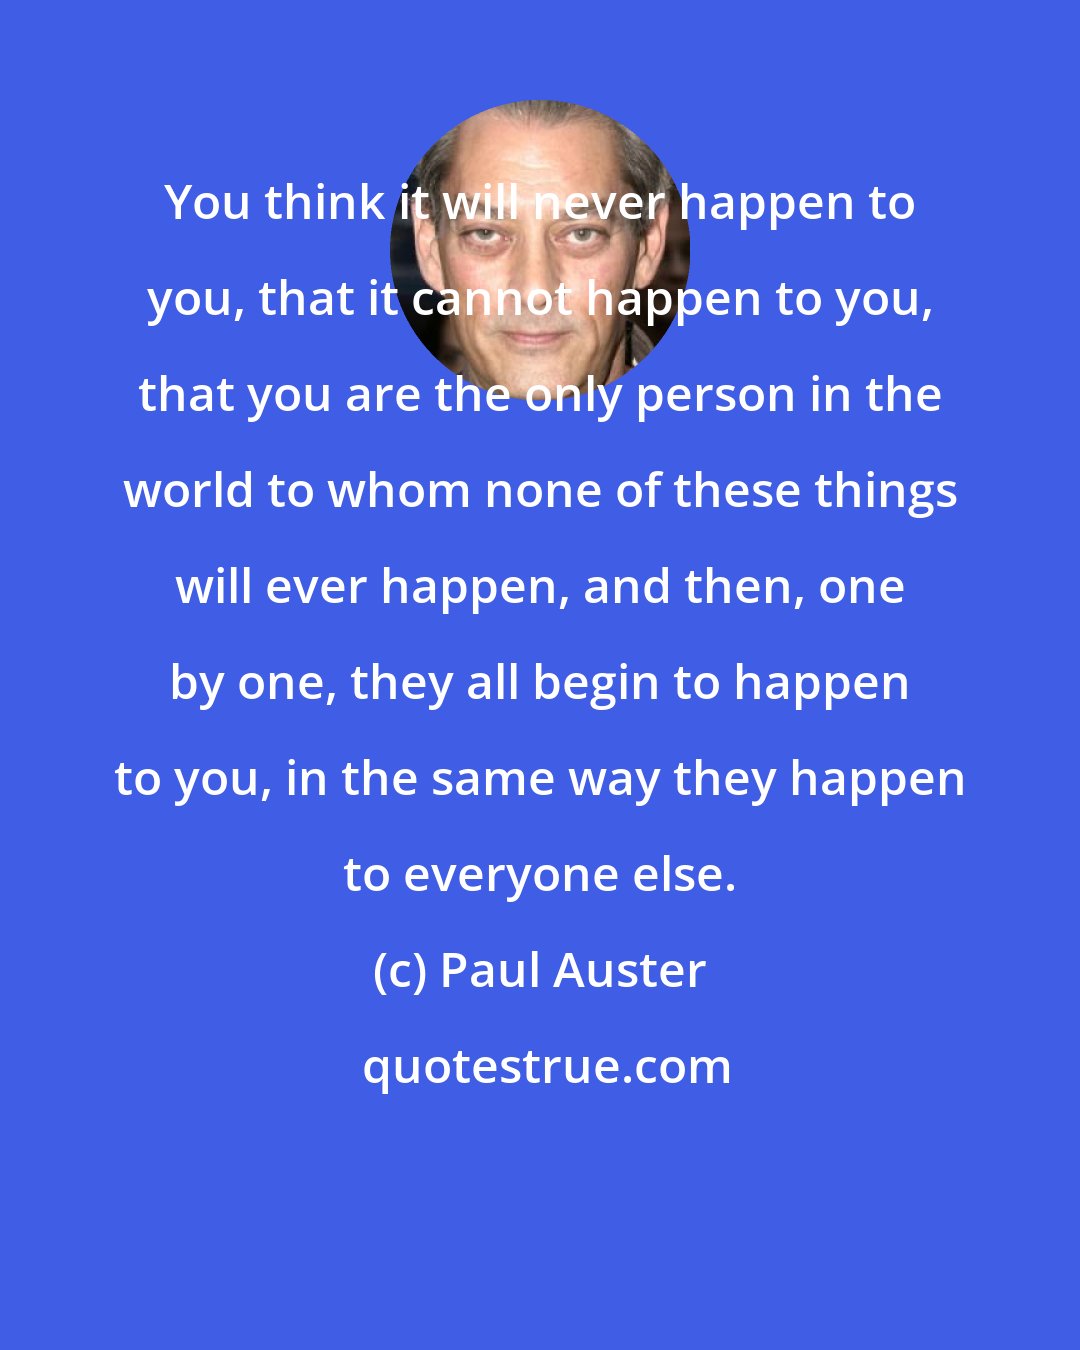 Paul Auster: You think it will never happen to you, that it cannot happen to you, that you are the only person in the world to whom none of these things will ever happen, and then, one by one, they all begin to happen to you, in the same way they happen to everyone else.